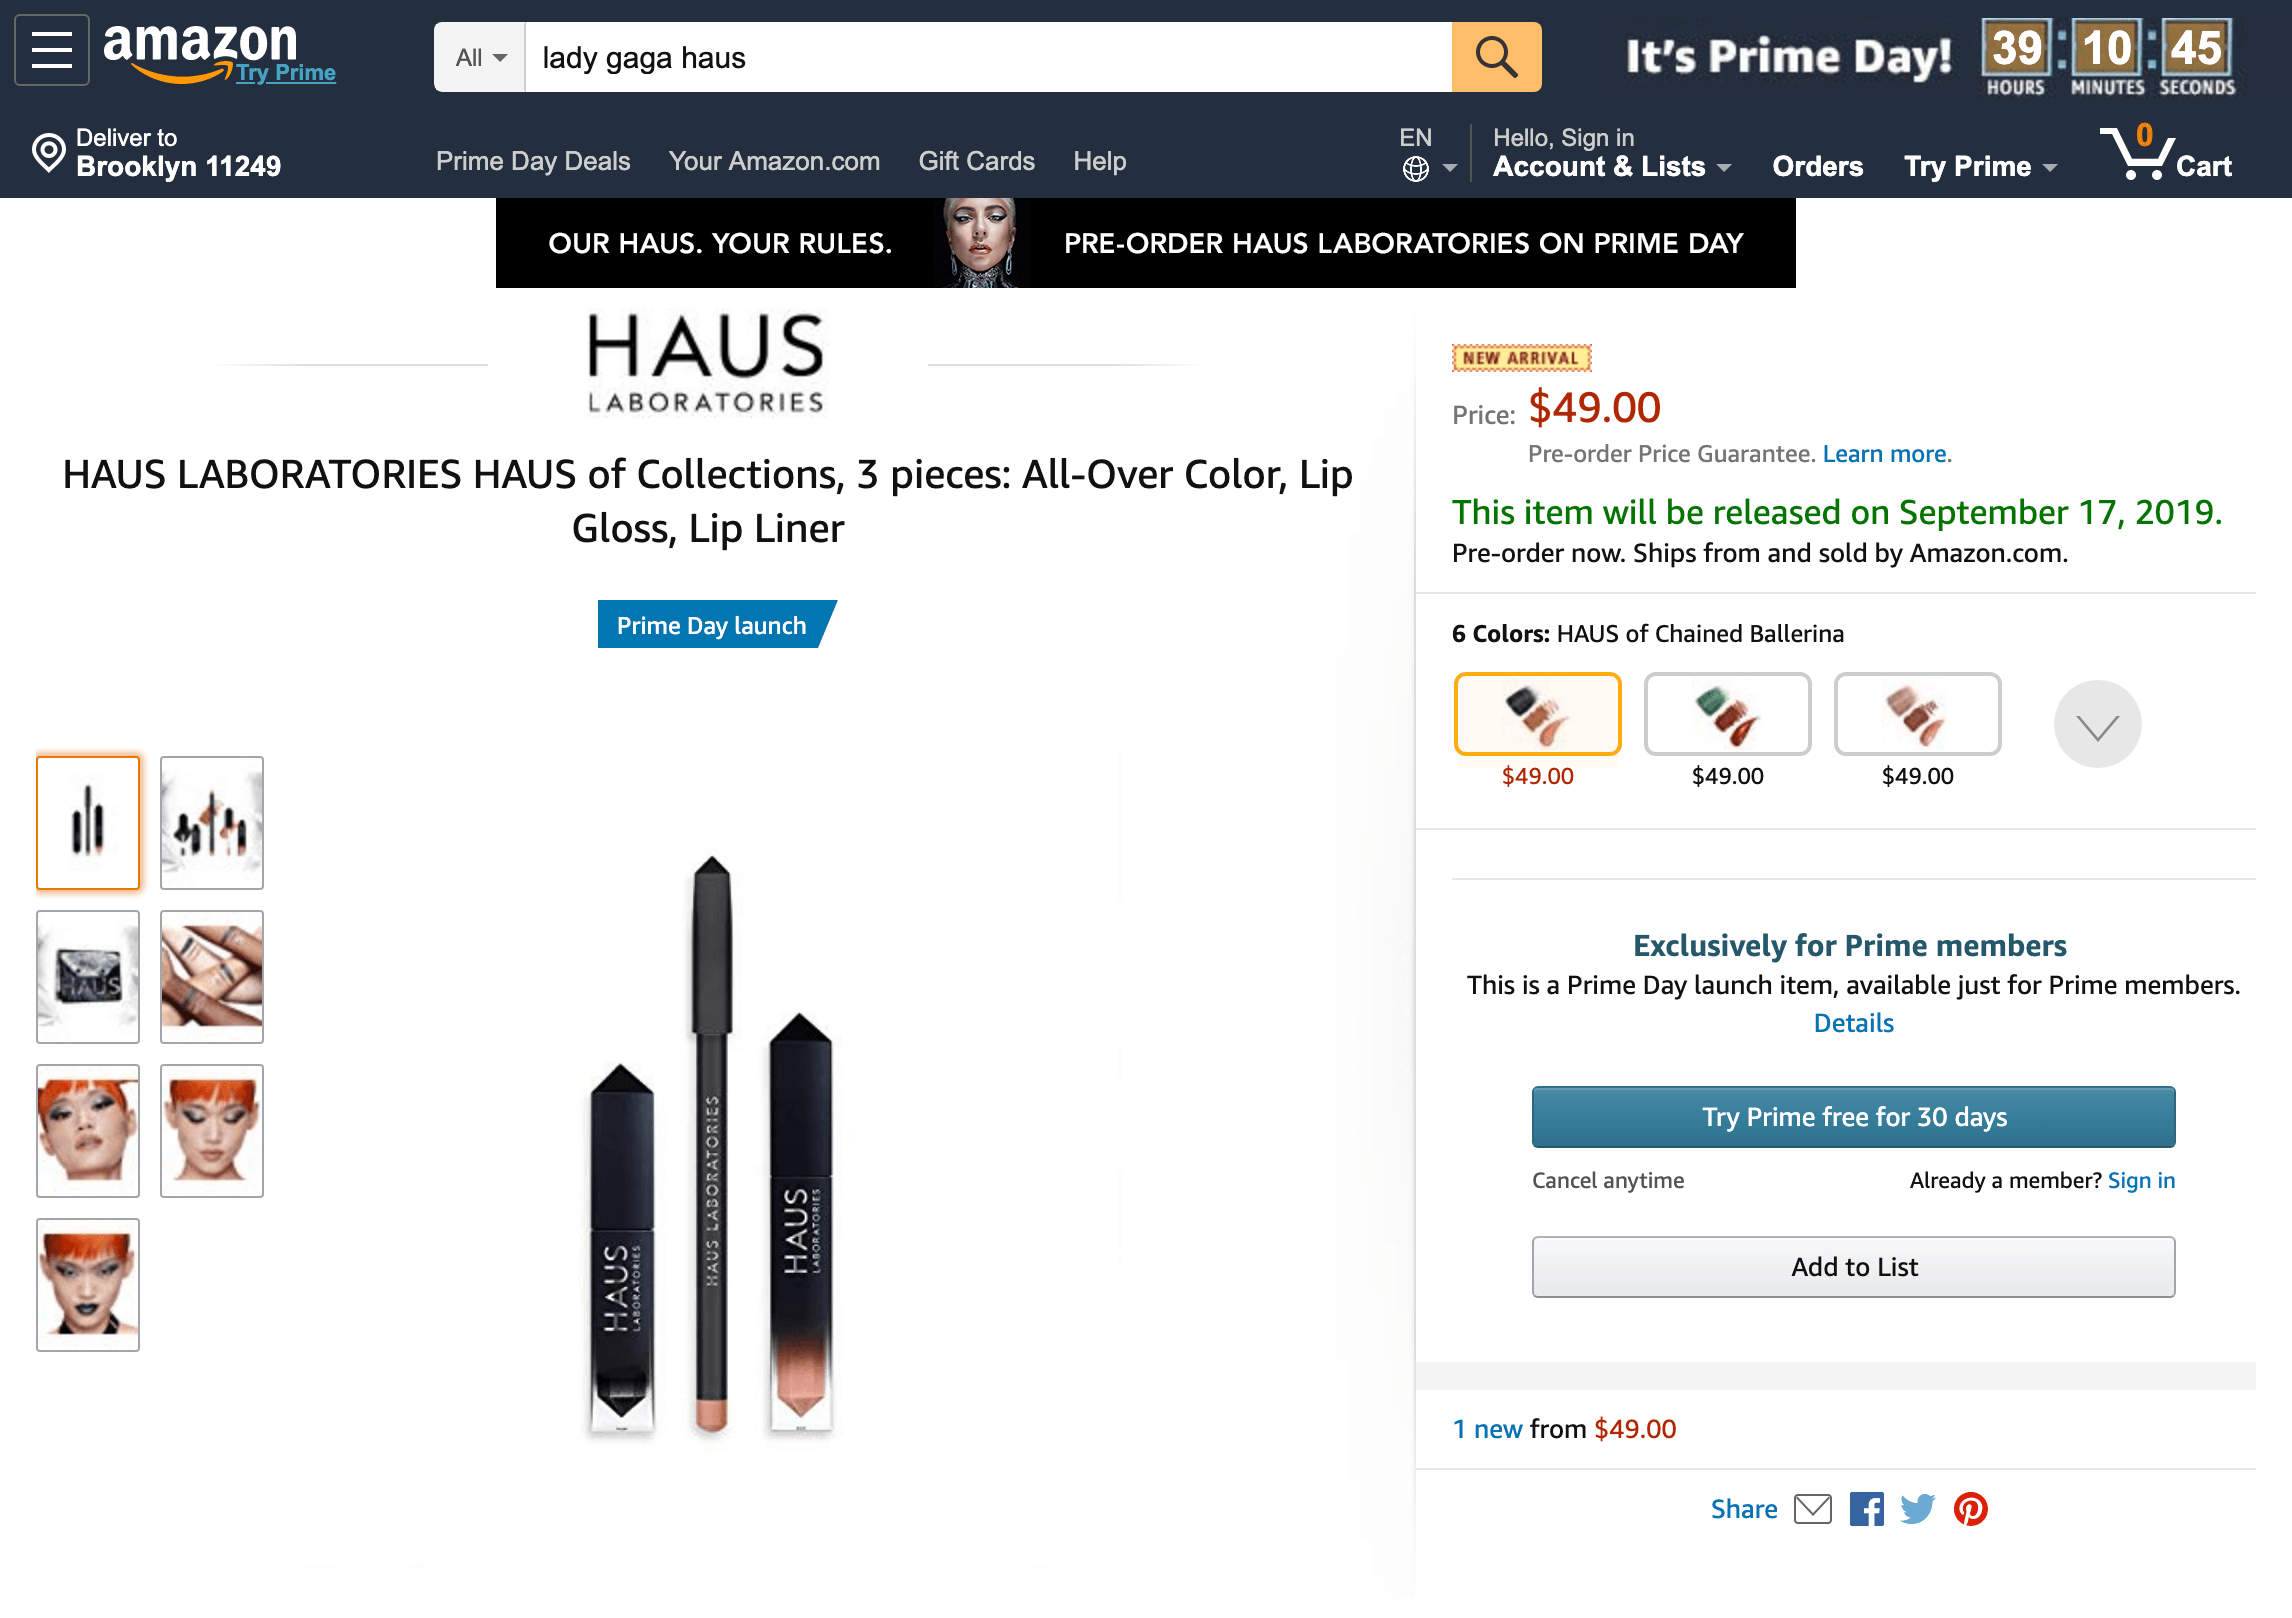 Haus Laboratories launch on Prime Day